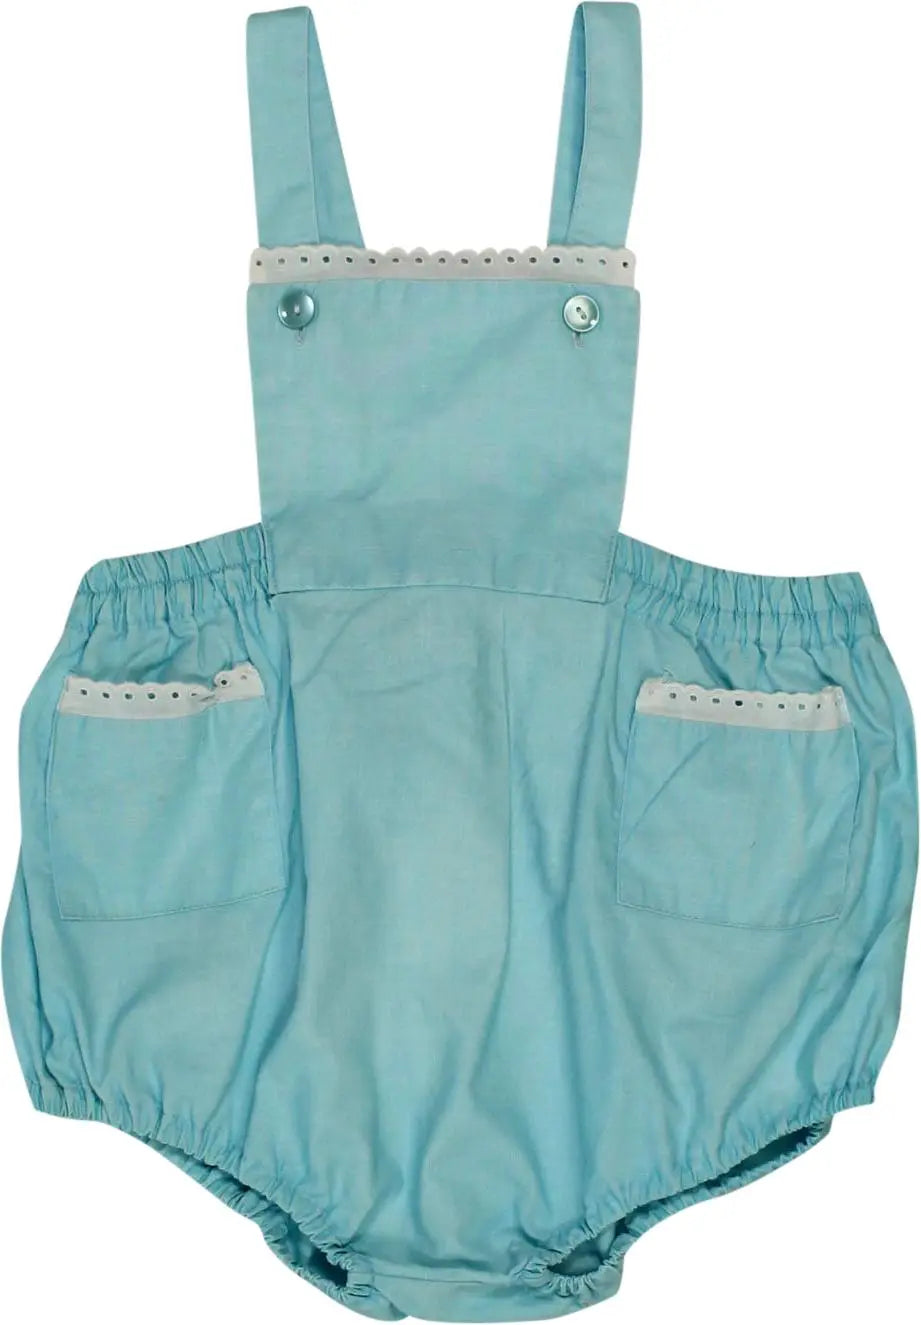 Unknown - Blue Vintage Dungarees- ThriftTale.com - Vintage and second handclothing